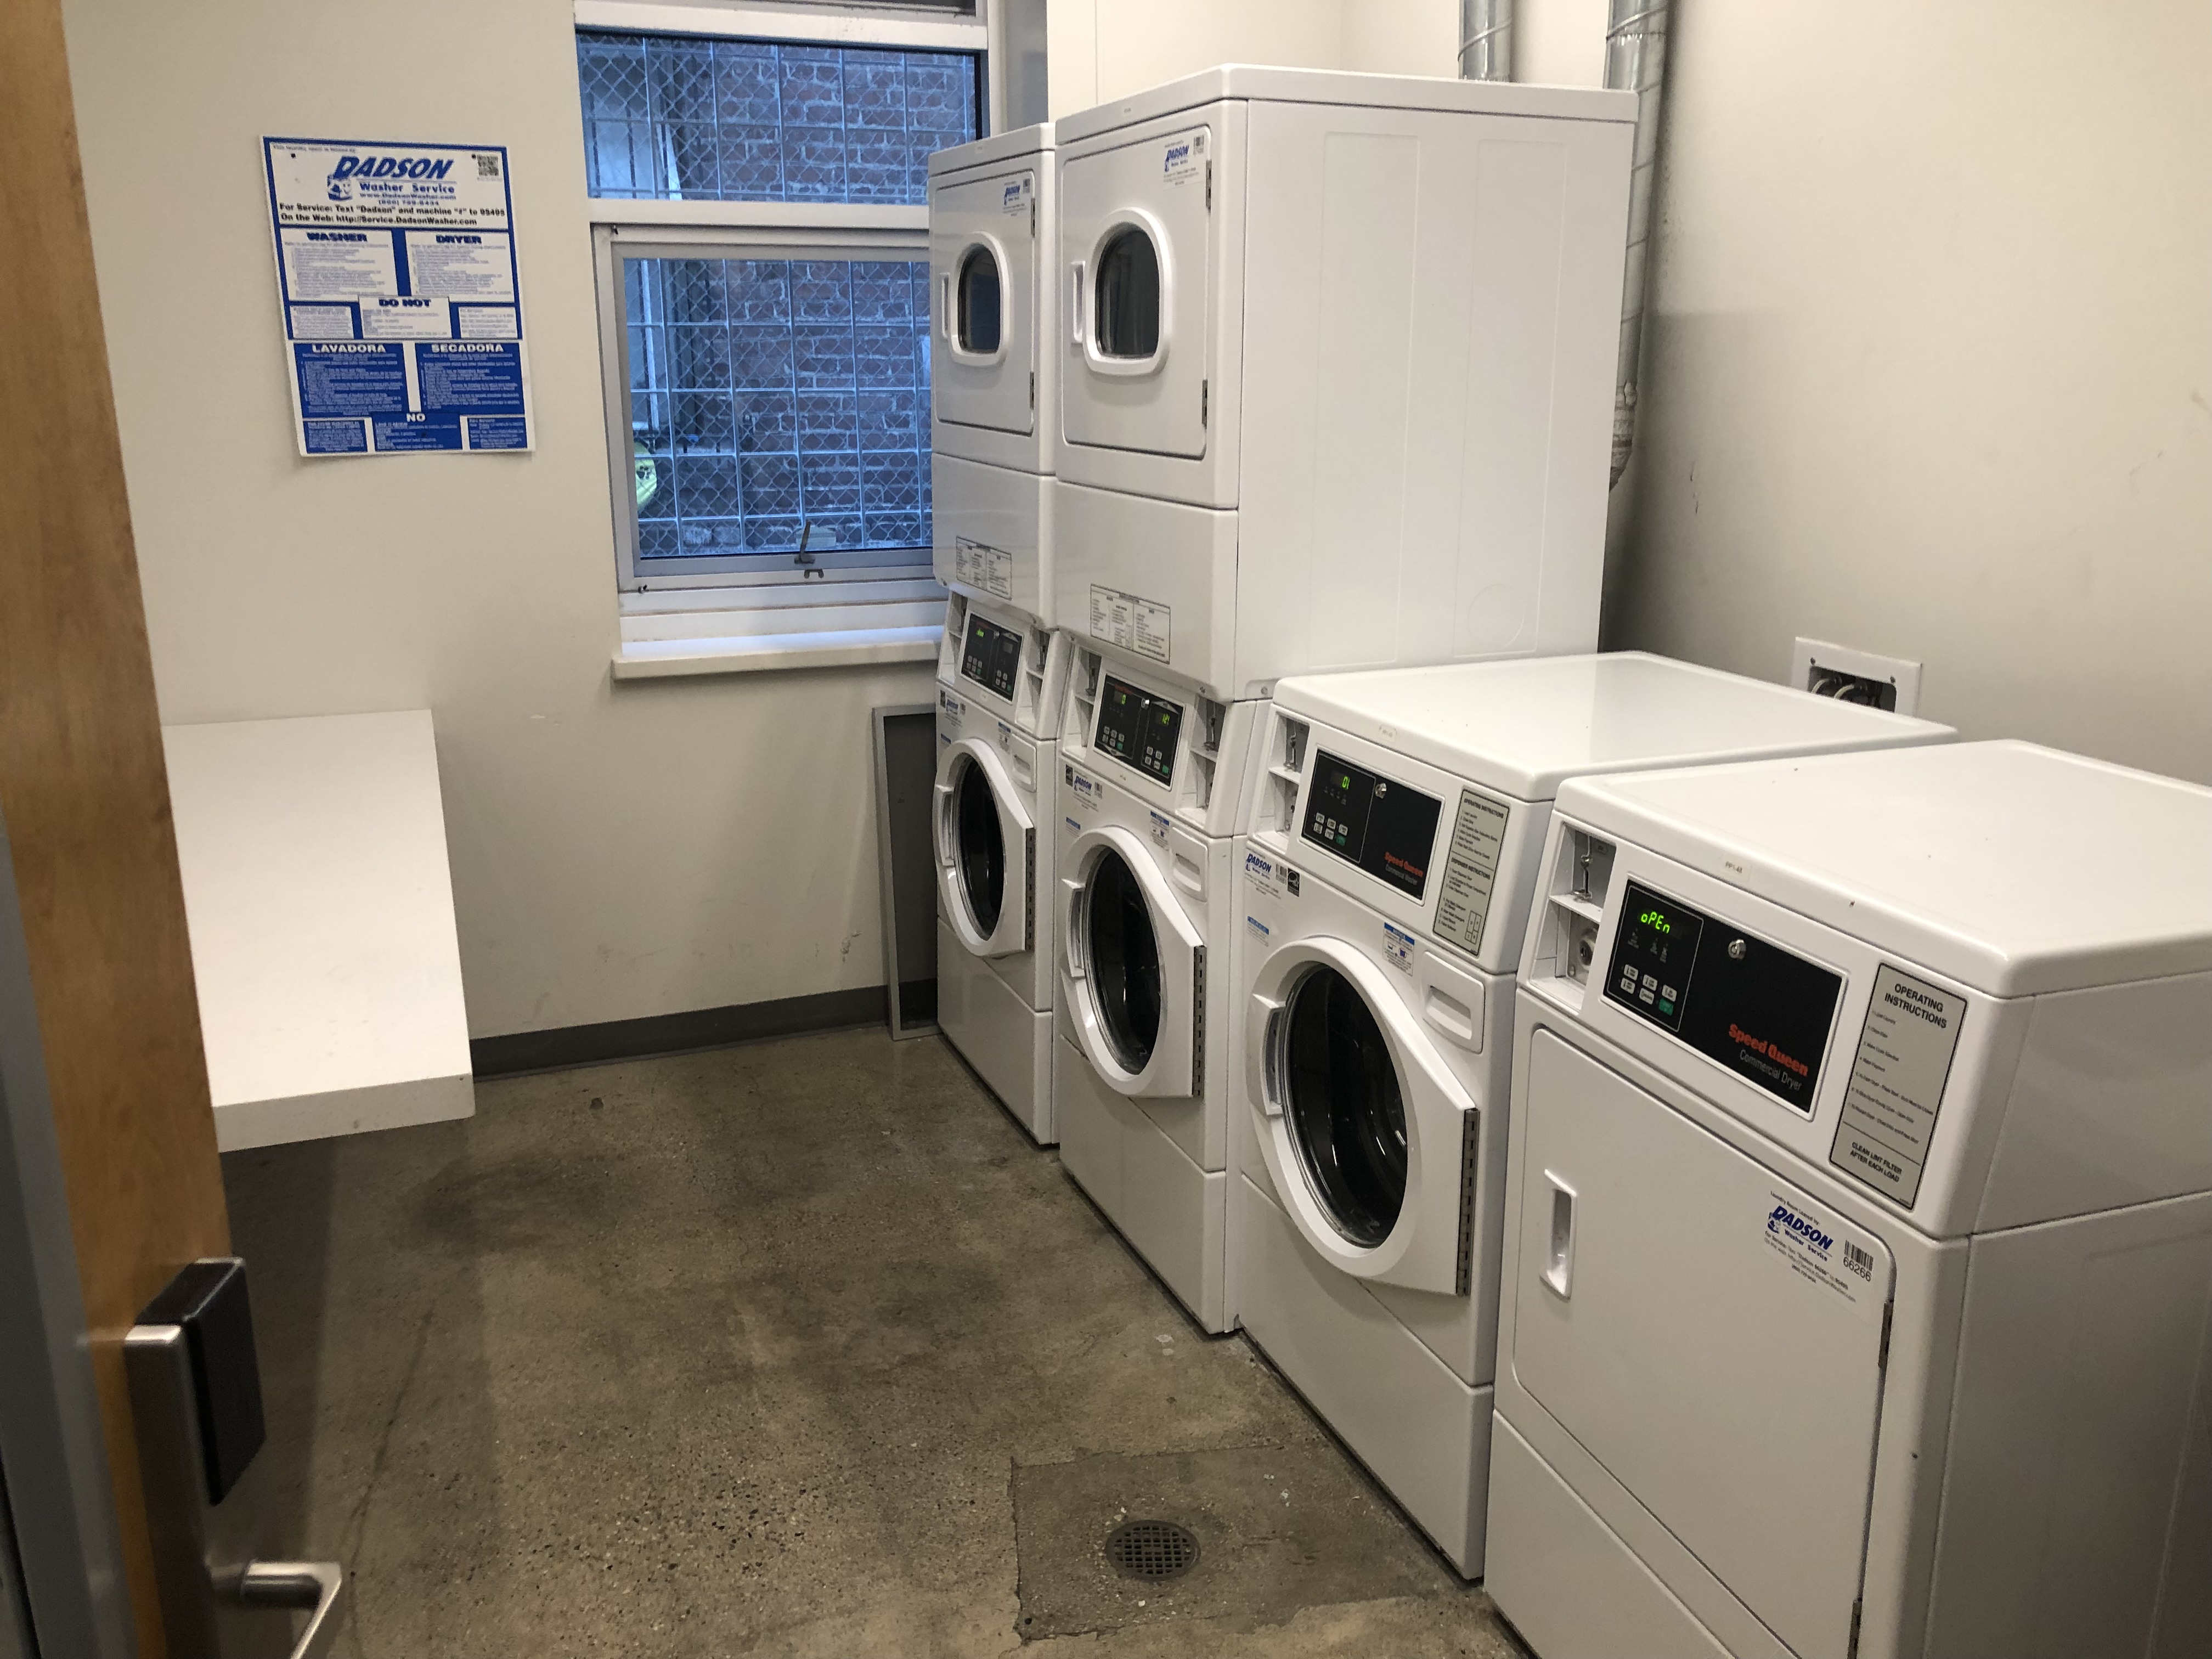 Interior view of a laundry room at Simone Hotel, three washers and three dryers.